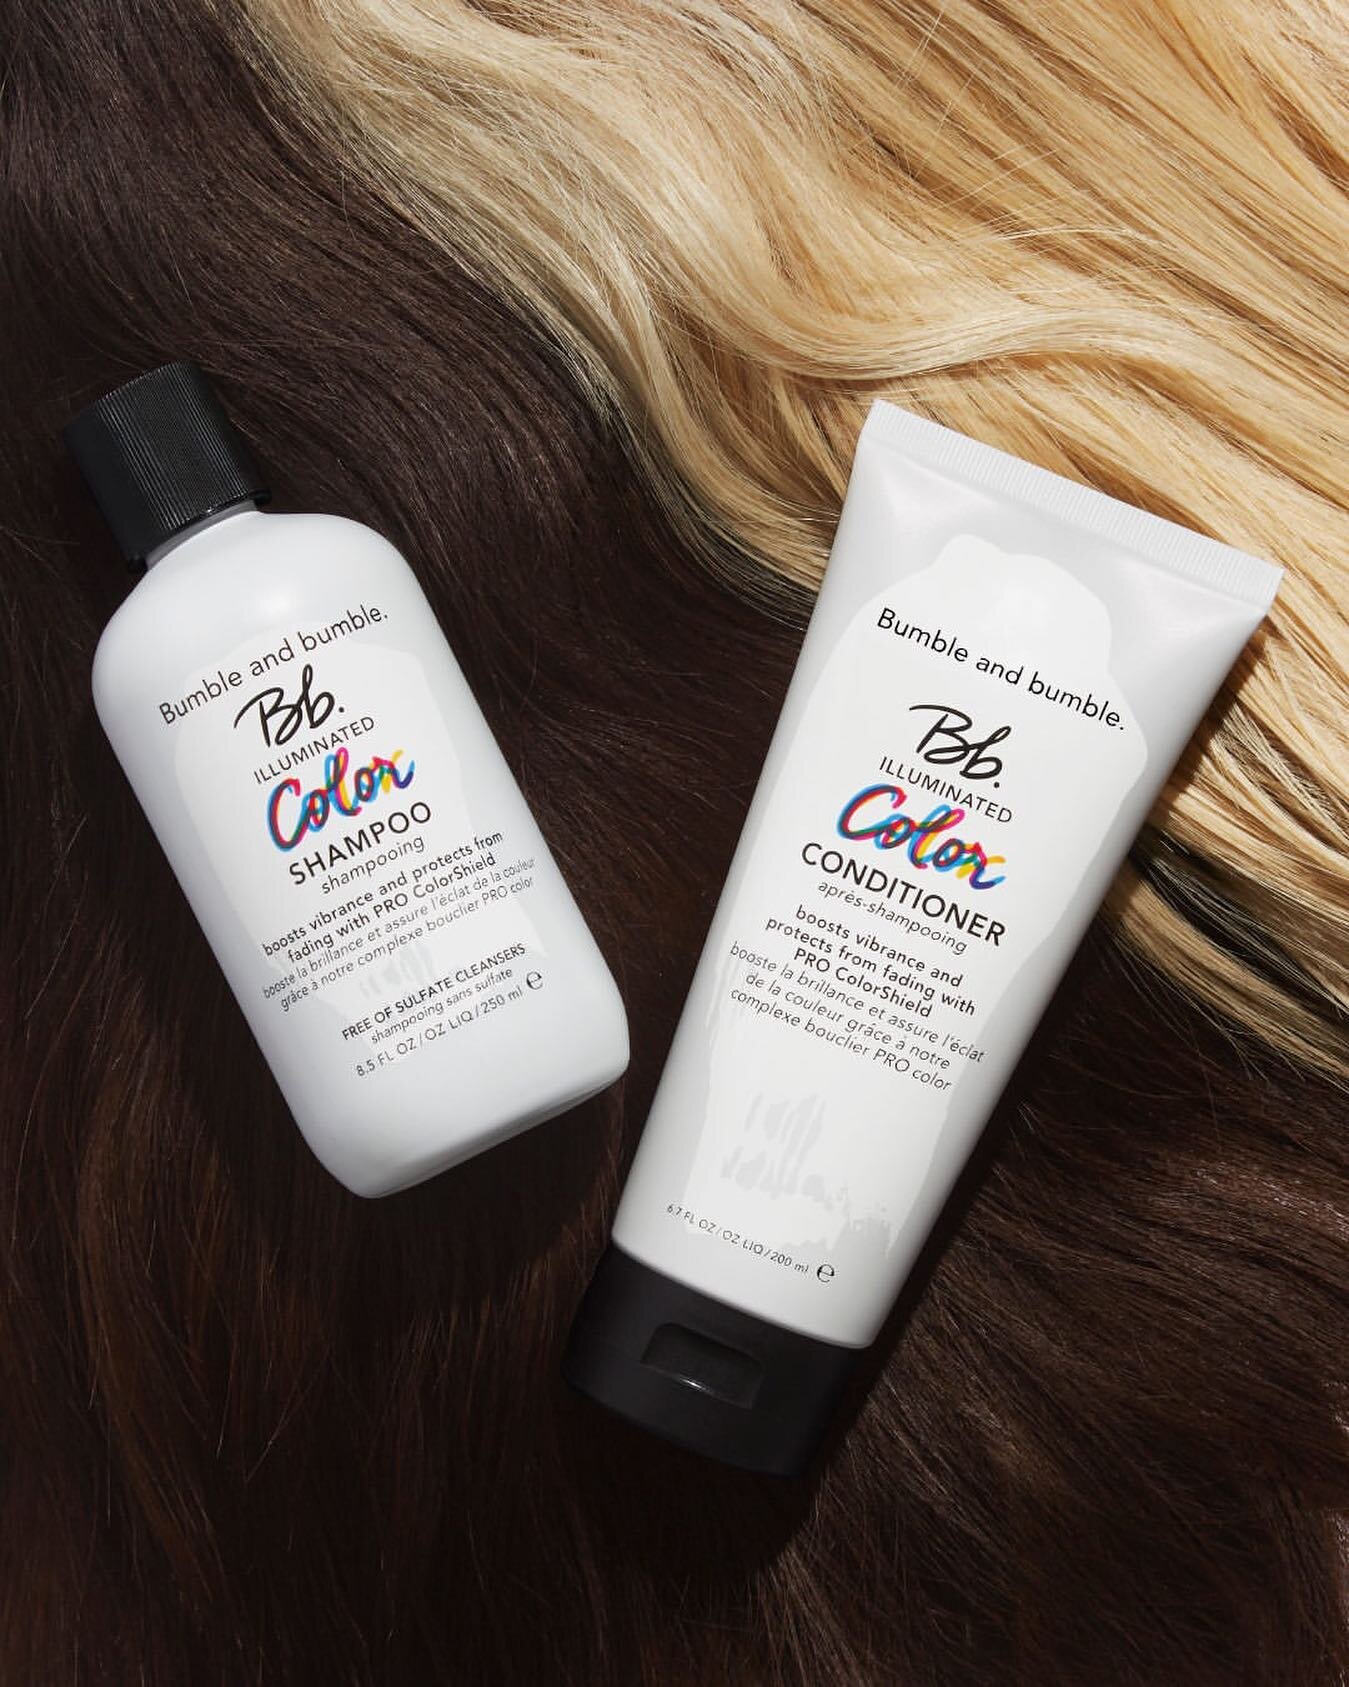 Love your new hue? Here&rsquo;s how to wash it. NEW Illuminated Color Shampoo + Conditioner &mdash; your secret to vibrant, lasting color️. Here&rsquo;s why our Pros love it:

🎨 4x color-safe hydration vs. untreated hair
🌟 +90% vibrancy instantly v